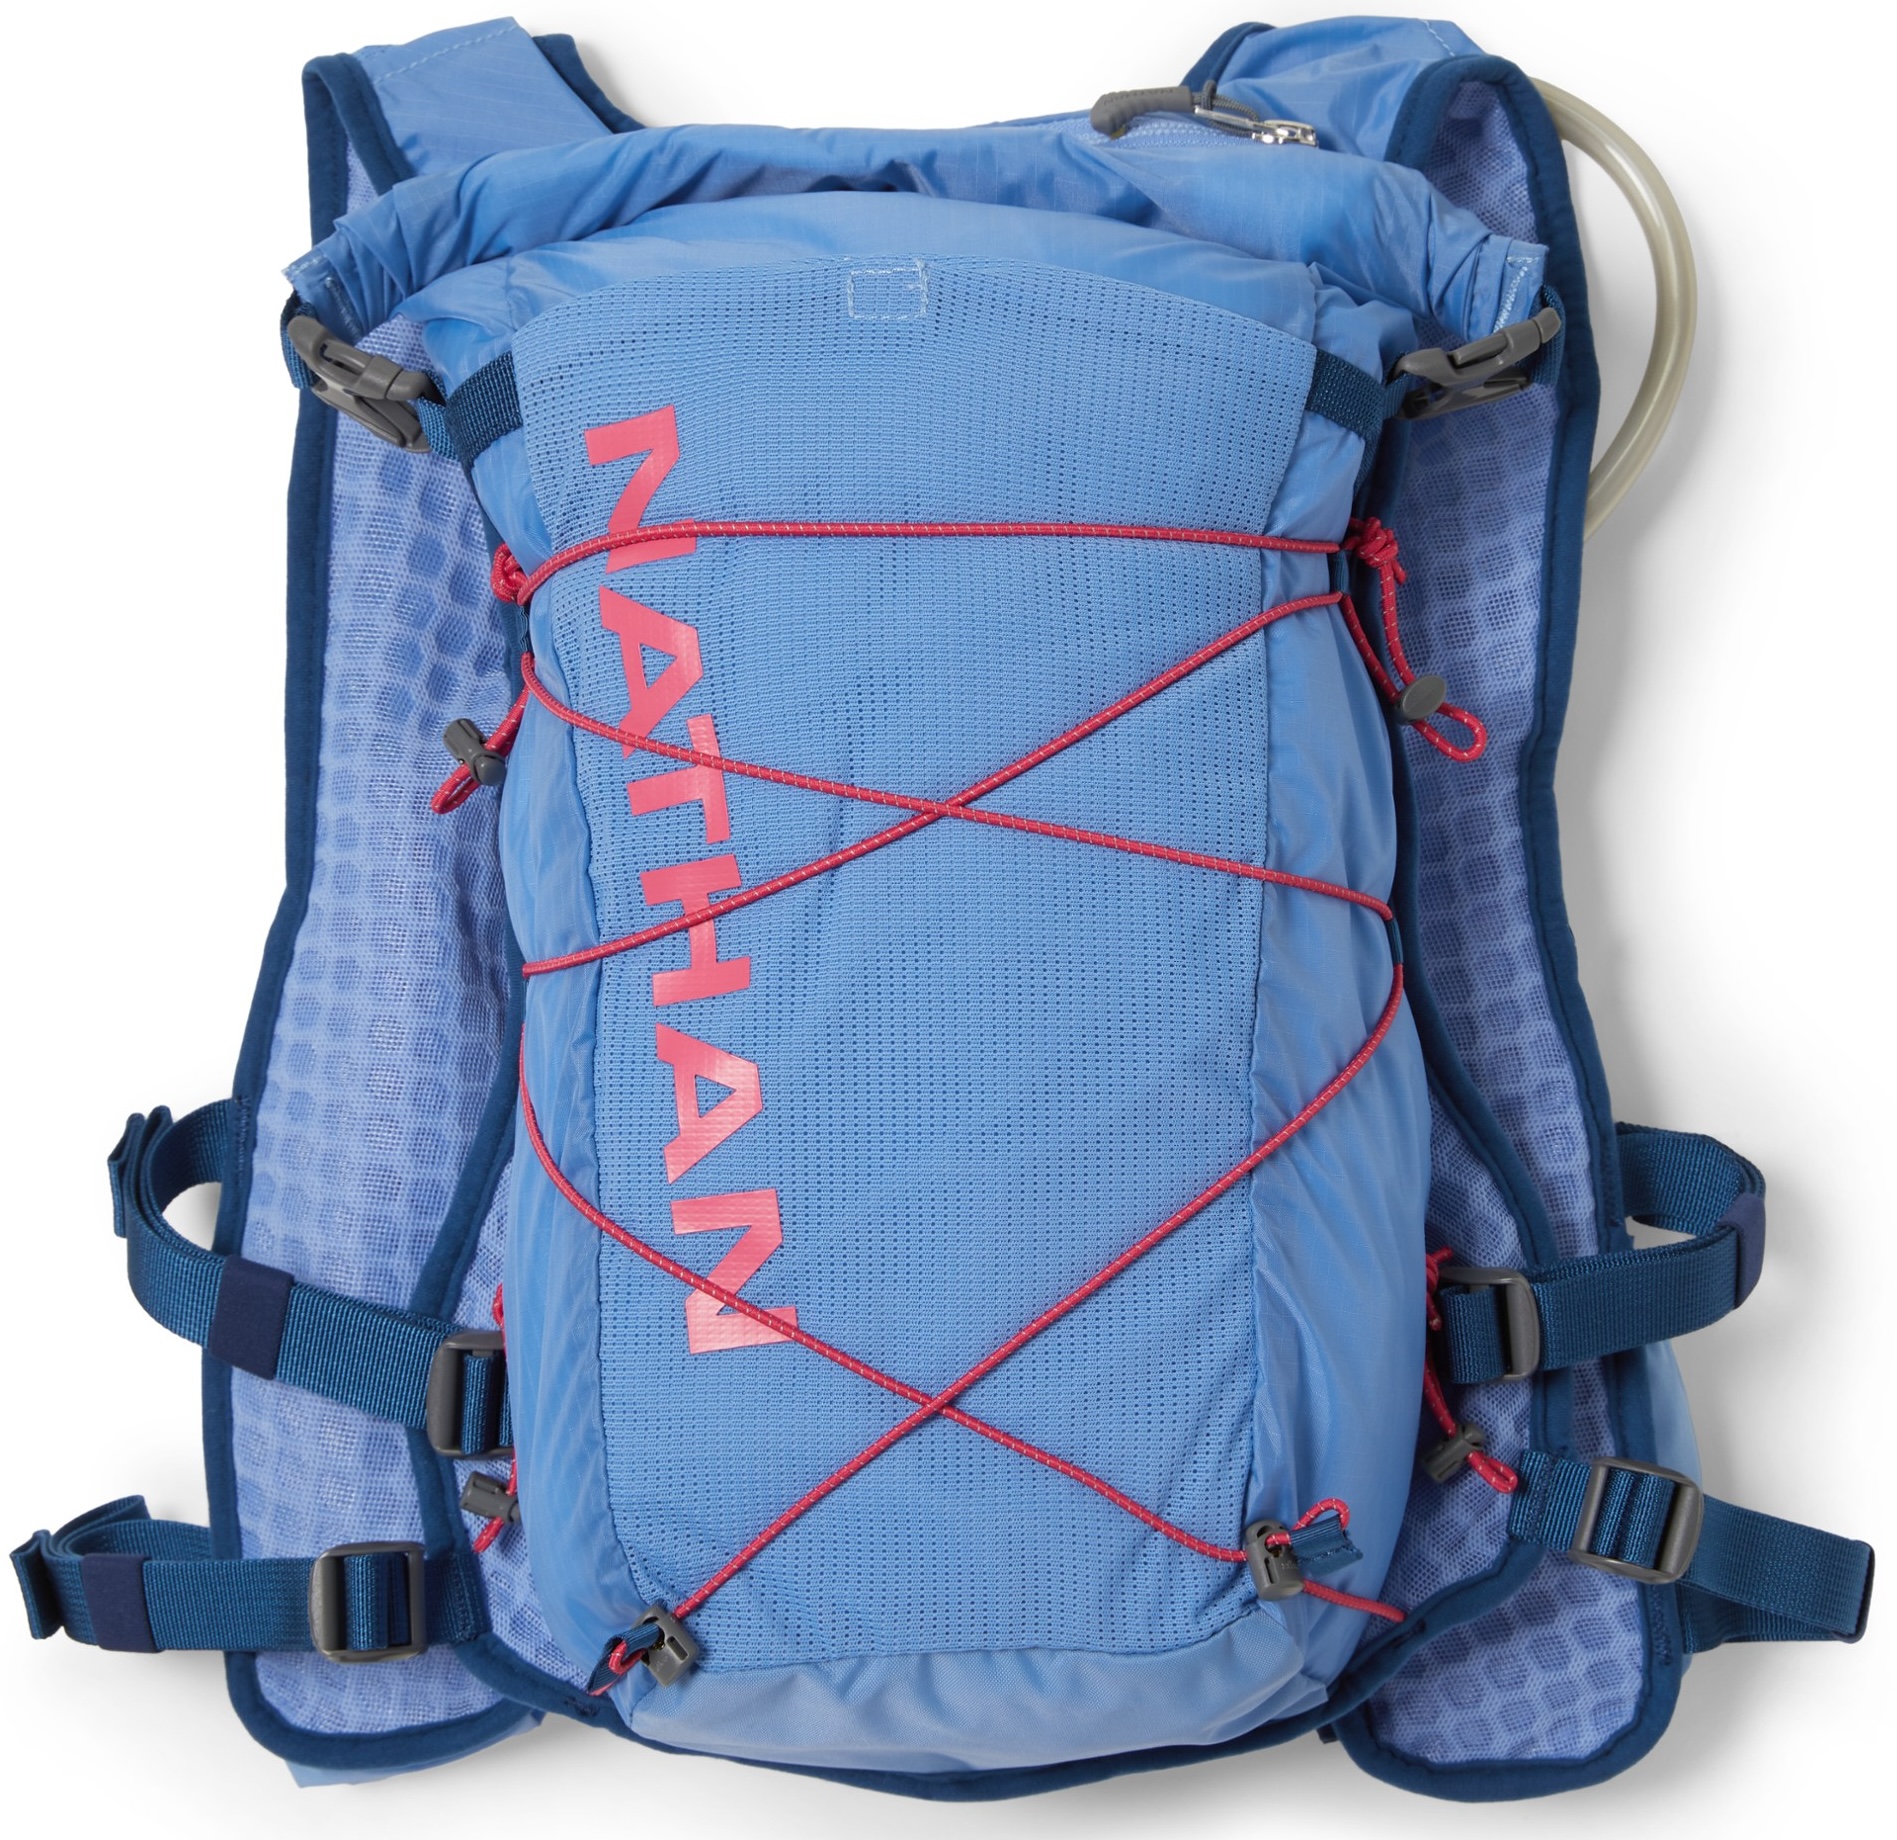 Nathan TrailMix 2.0 12L hydration pack